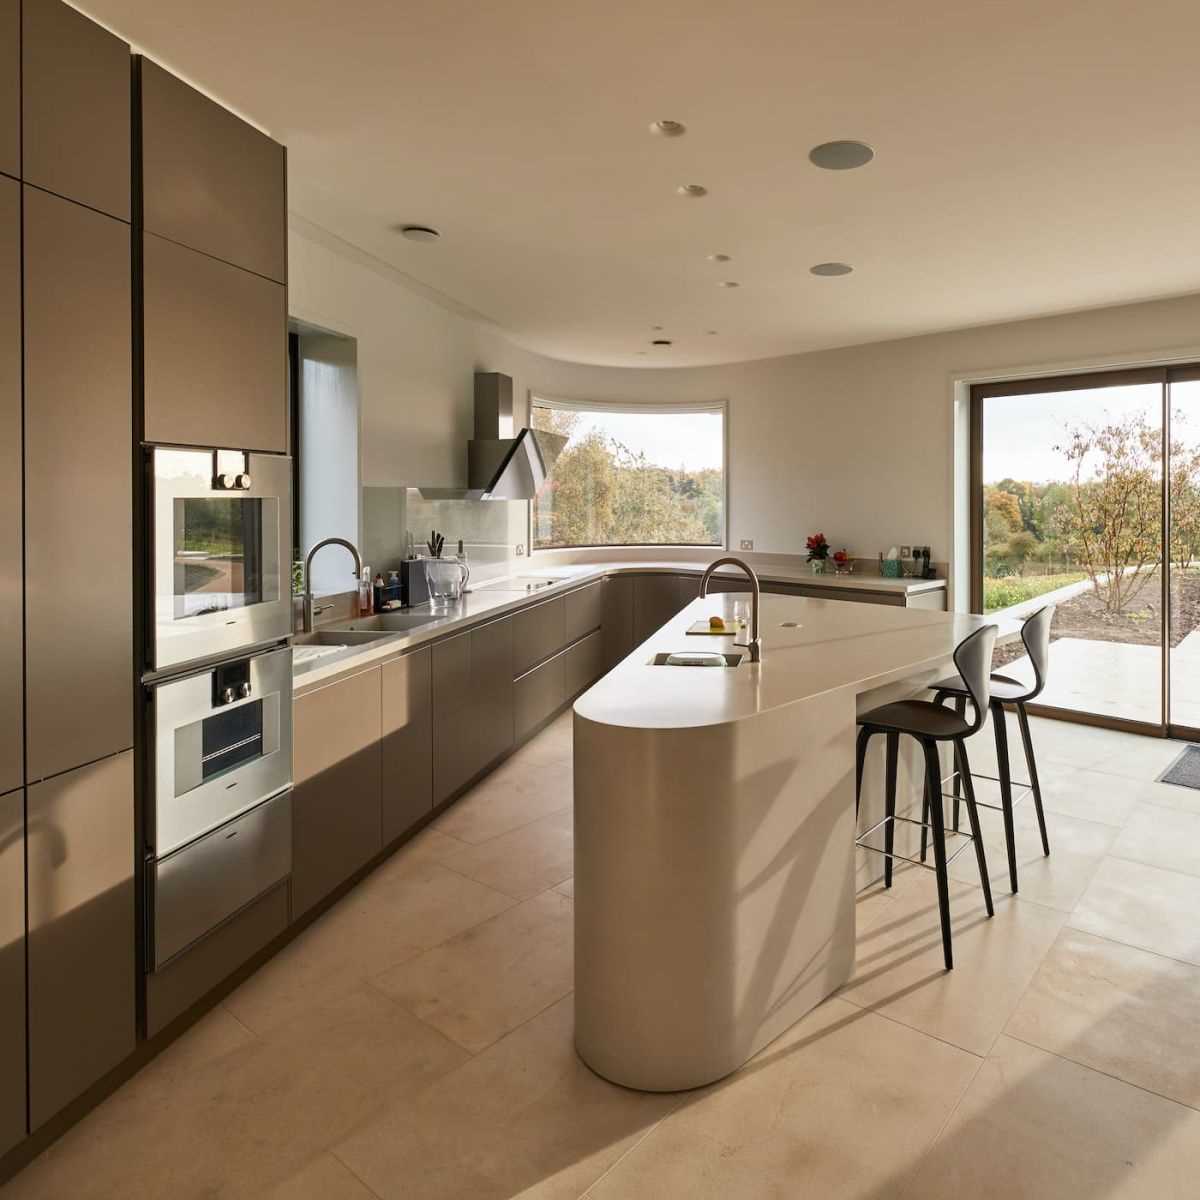 A modern kitchen with curved that reflect the design of the home.